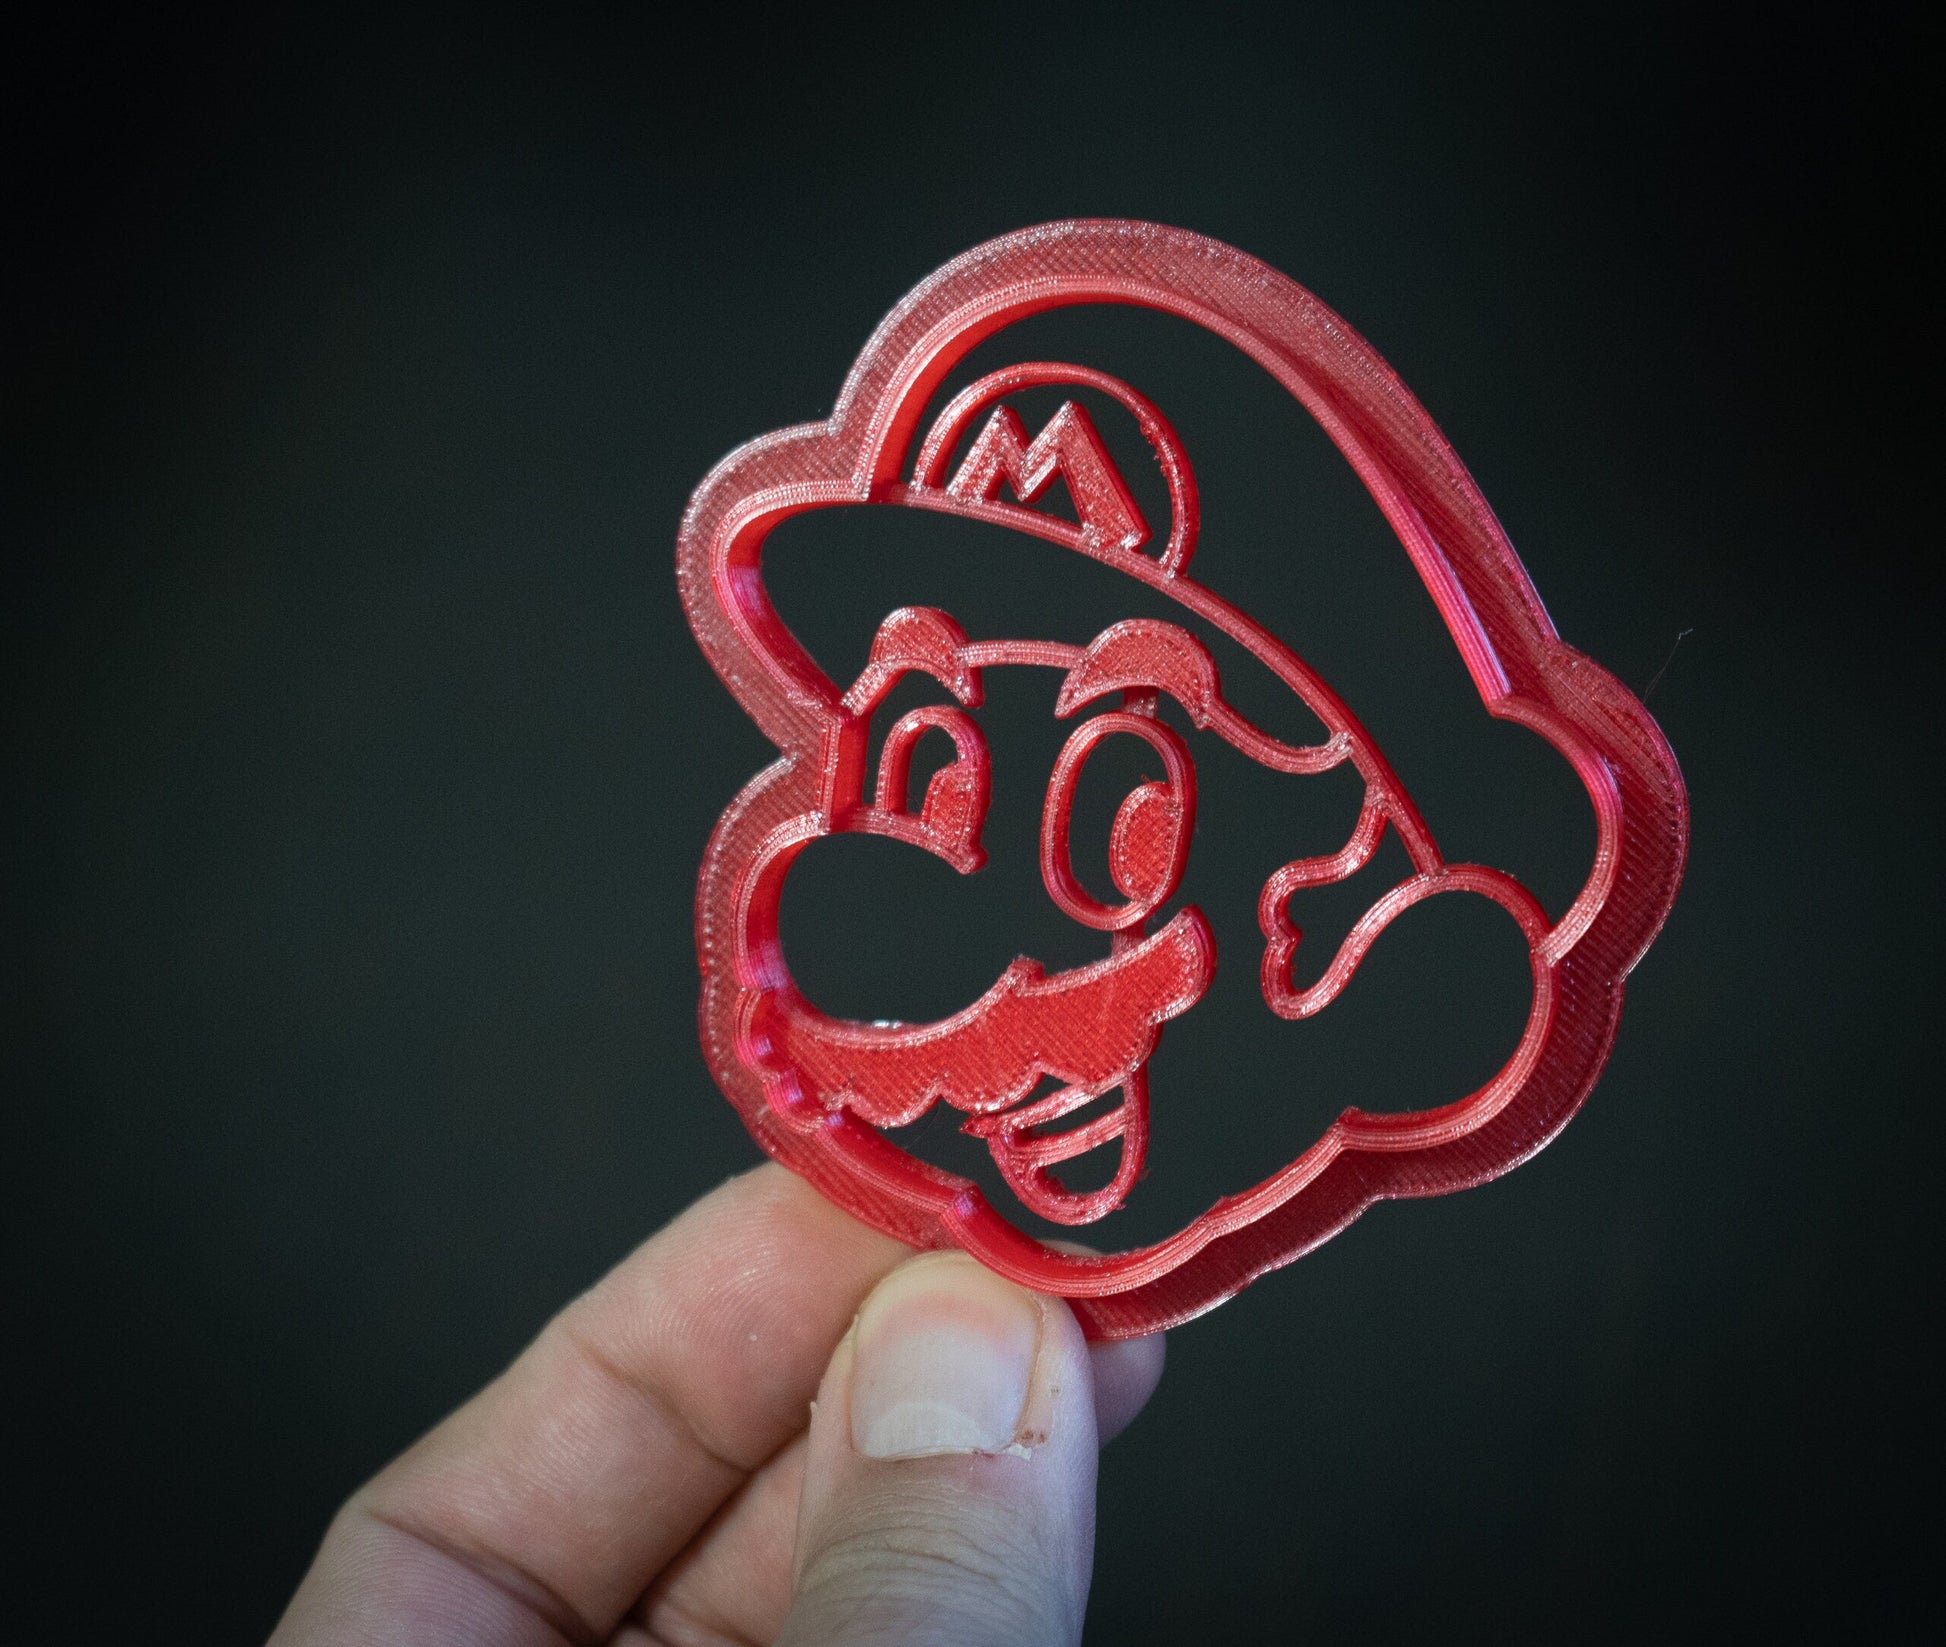 Super Mario Cookie Cutters set | Super mario Birthday Party | Video Game Cookie Cutters - 3DPrintProps